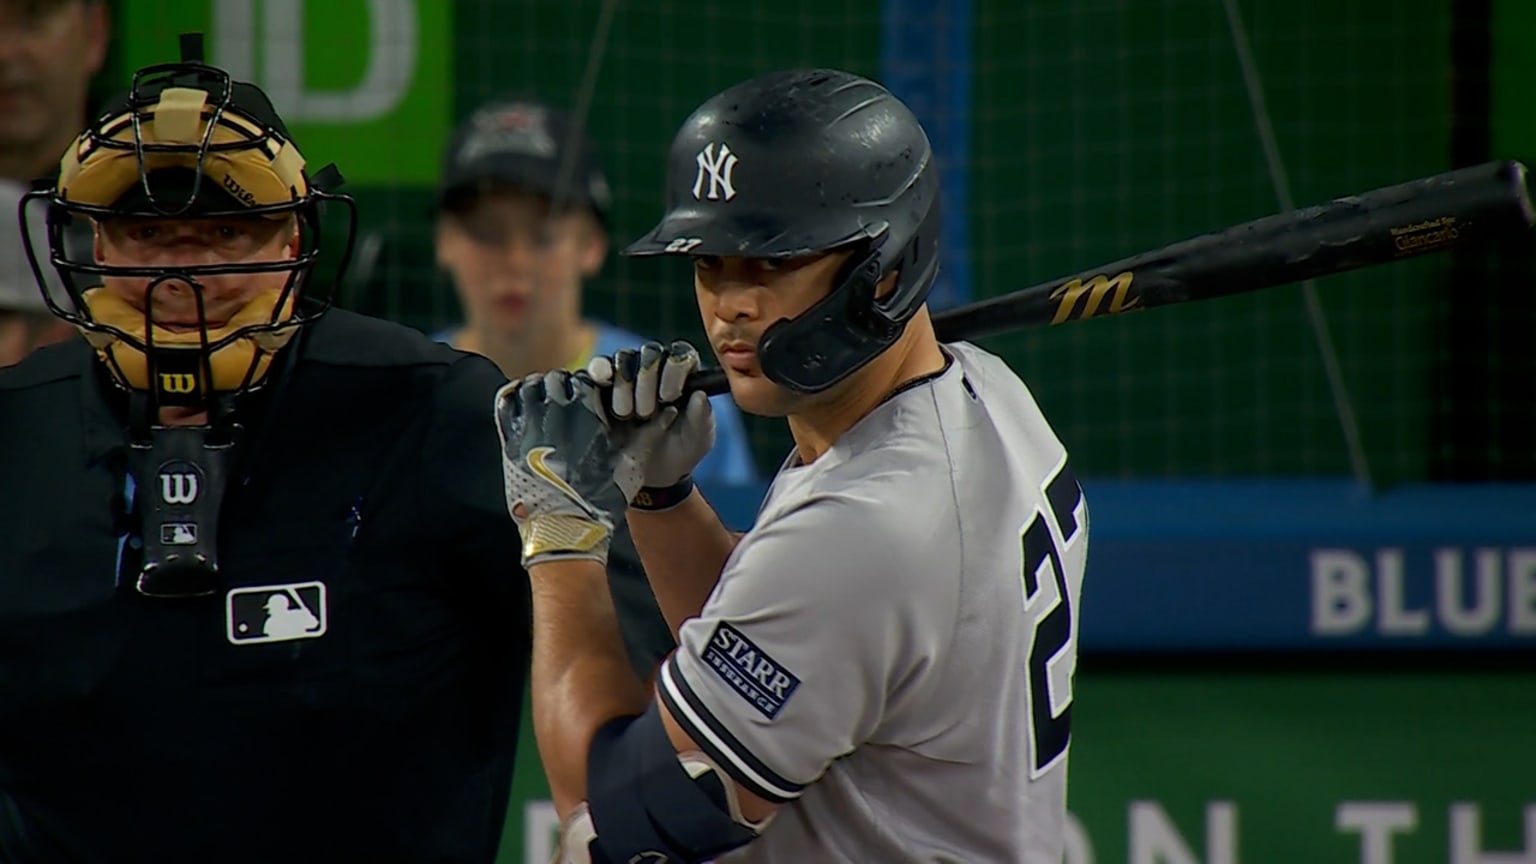 WATCH: Yankees' Giancarlo Stanton launches 1st home run of 2023